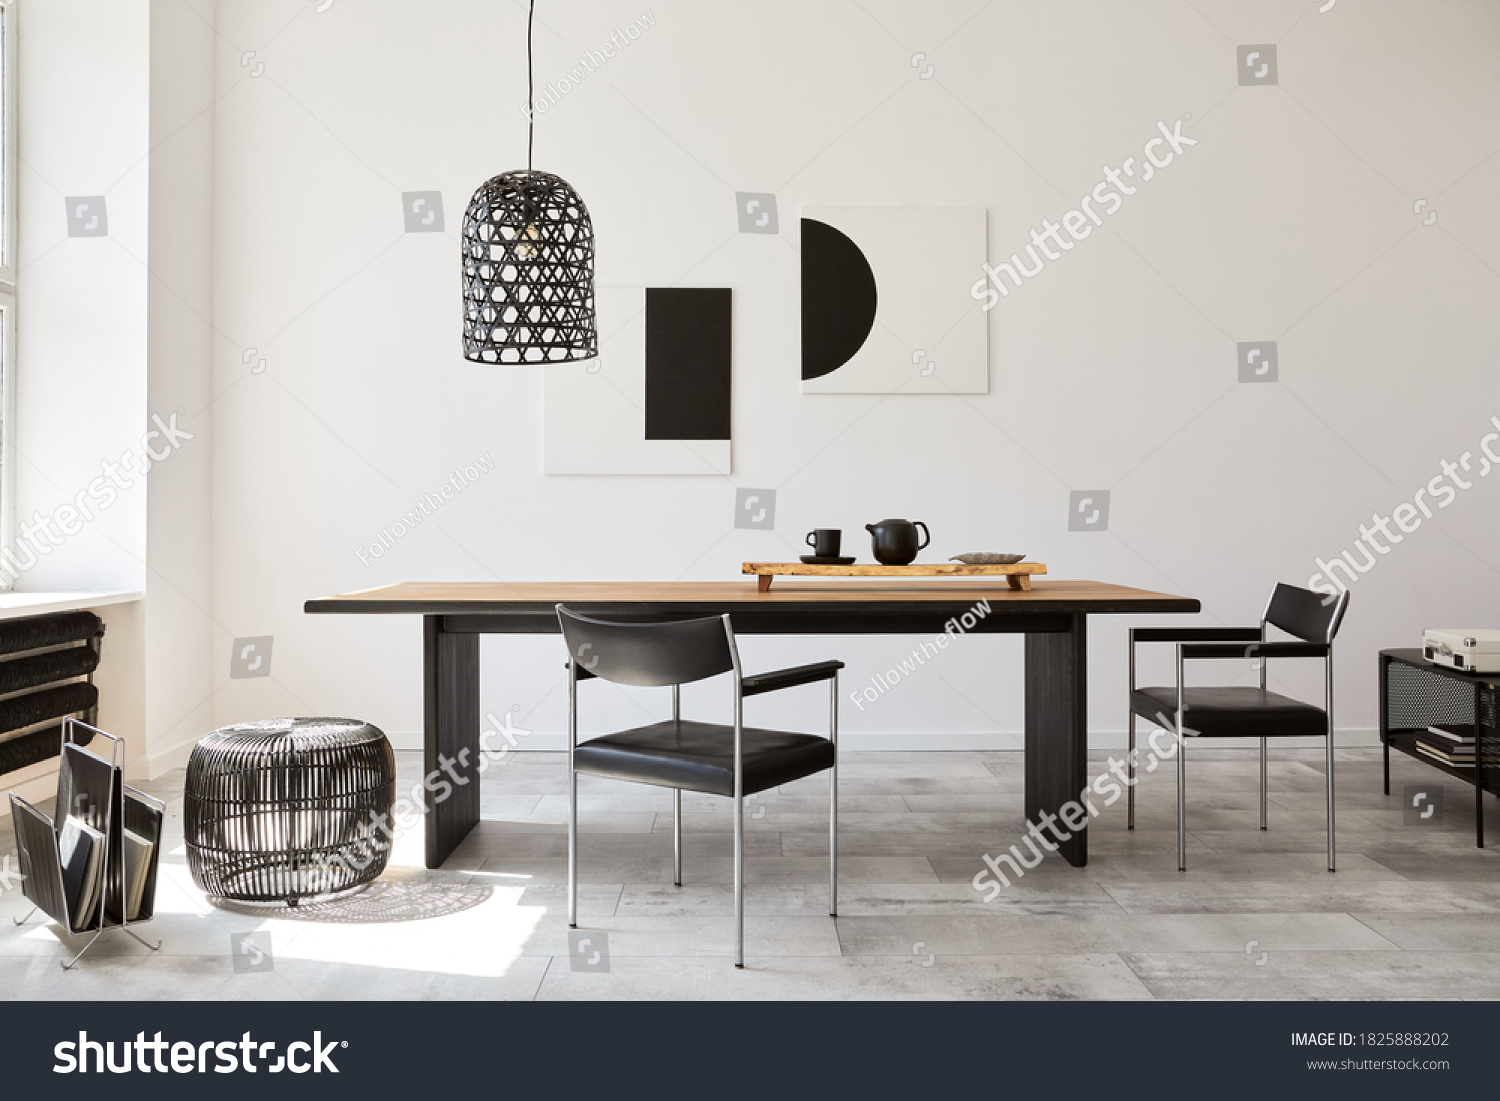 Stylish dining room interior with design wooden family table, black chairs, teapot with mug, mock up art paintings on the wall and elegant accessories in modern home decor. Template. #1825888202